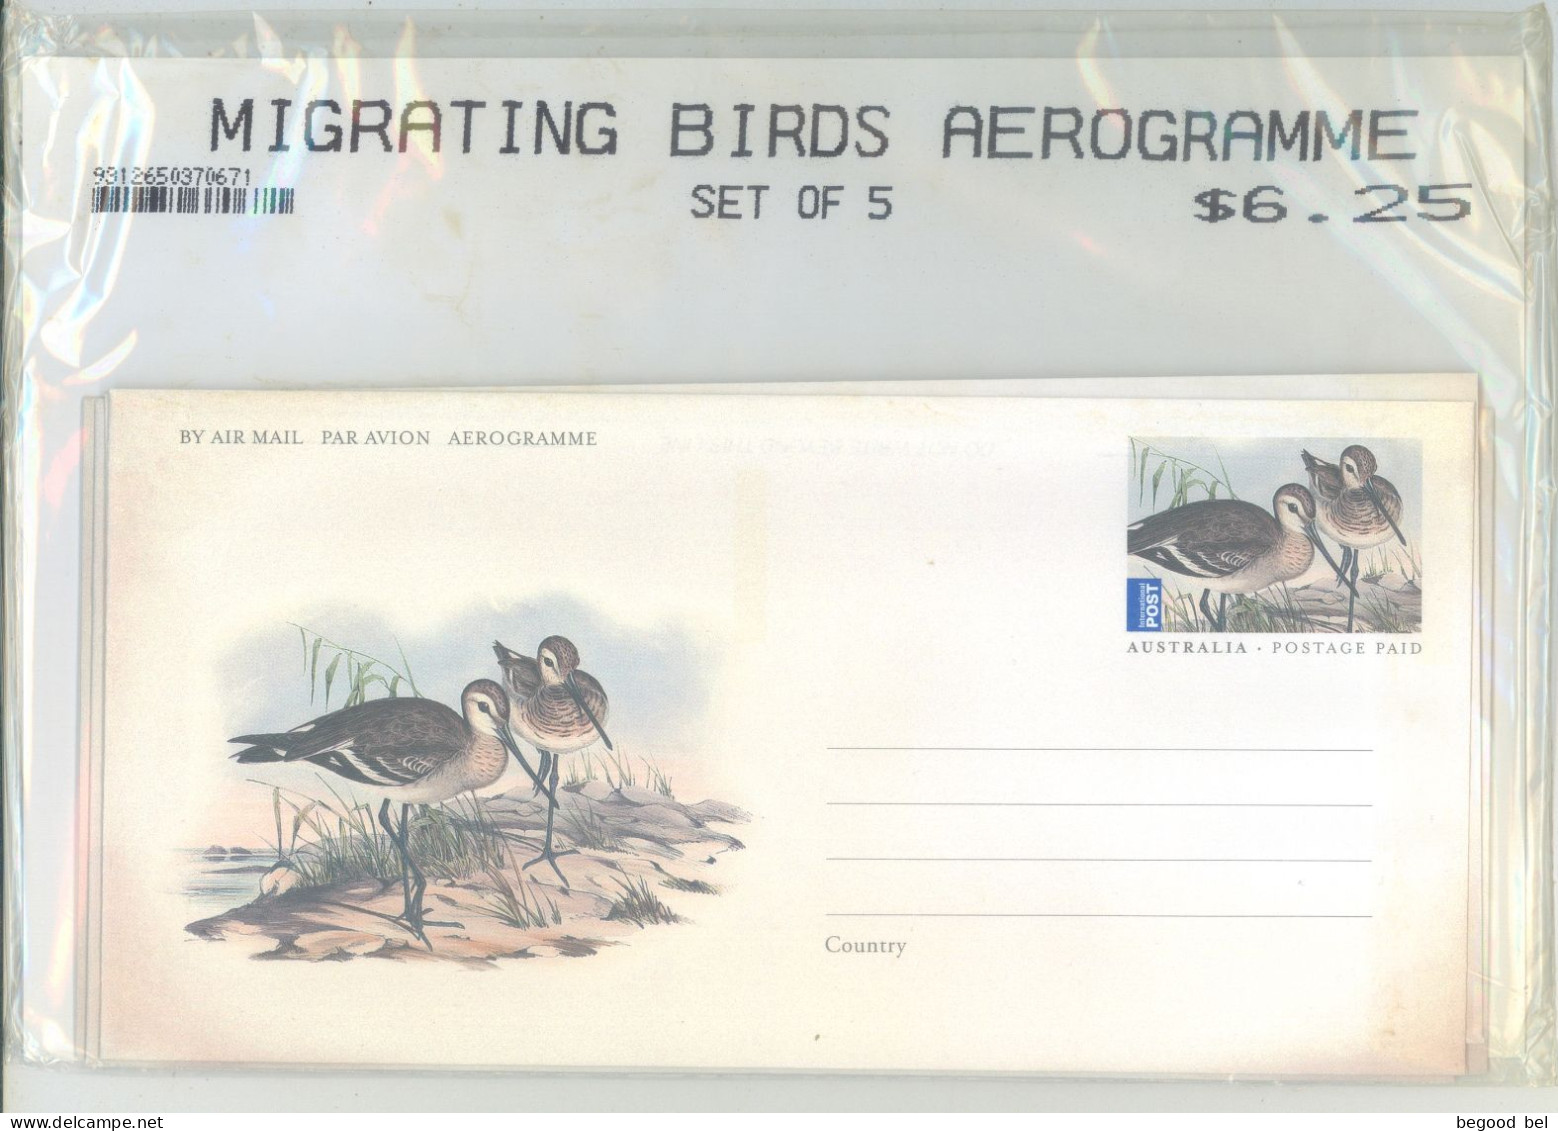 AUSTRALIA - AEROGRAMME COMPLETE SET OF 5 IN THE ORIGINAL ENCLOSED PACKAGING - 2009 - MIGRATING BIRDS -  Lot 25752 - Aerogramme